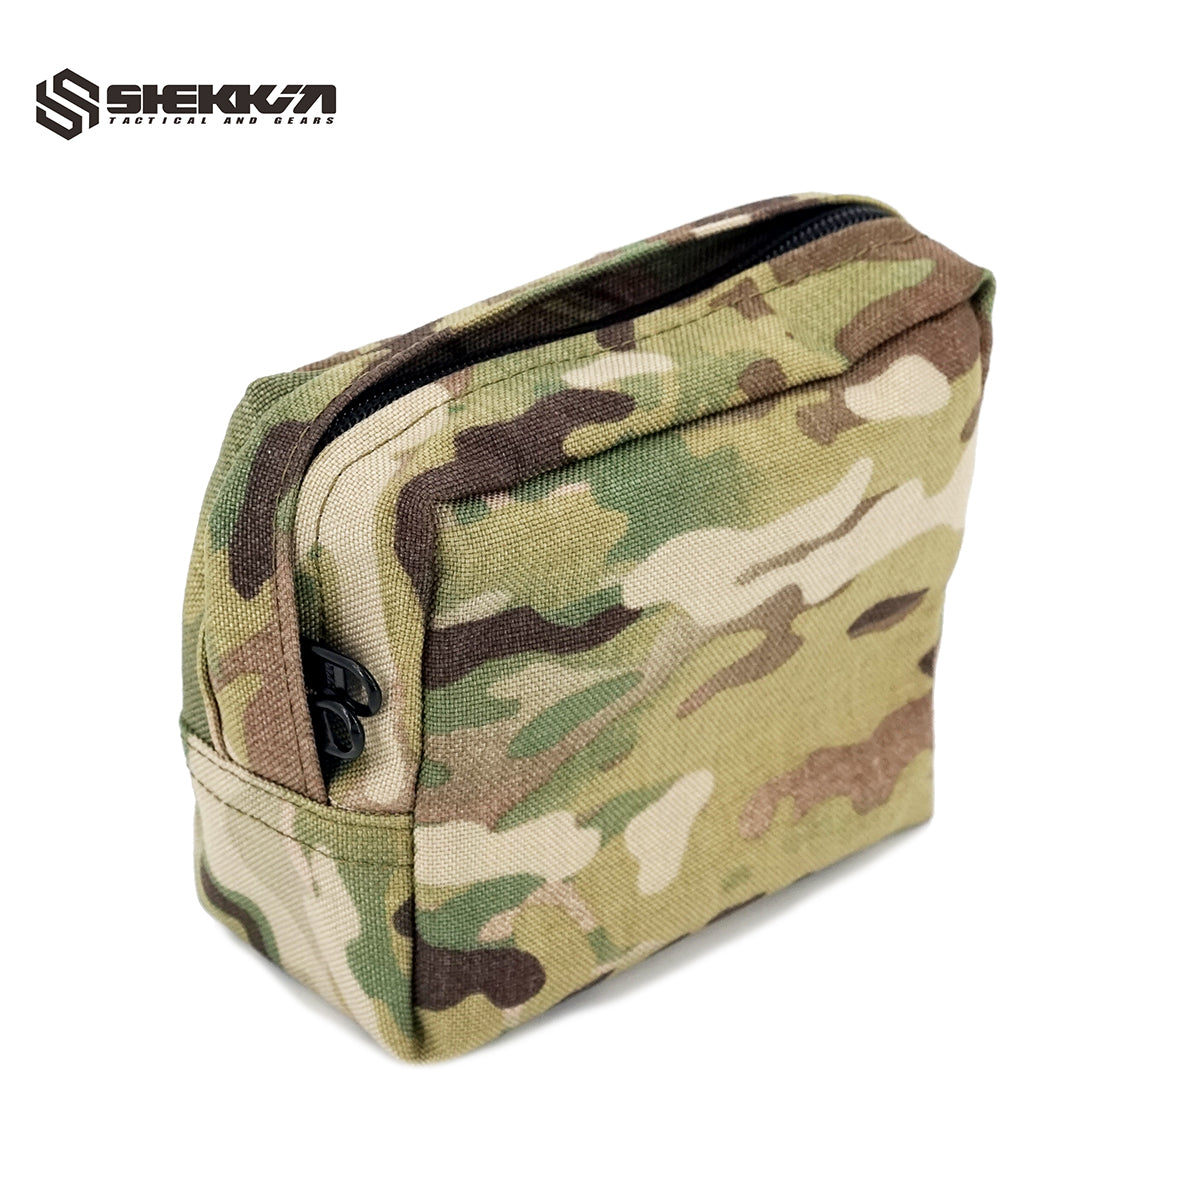 Pre MSA Paraclete style multicam small utility pouch - Shekkin Gears